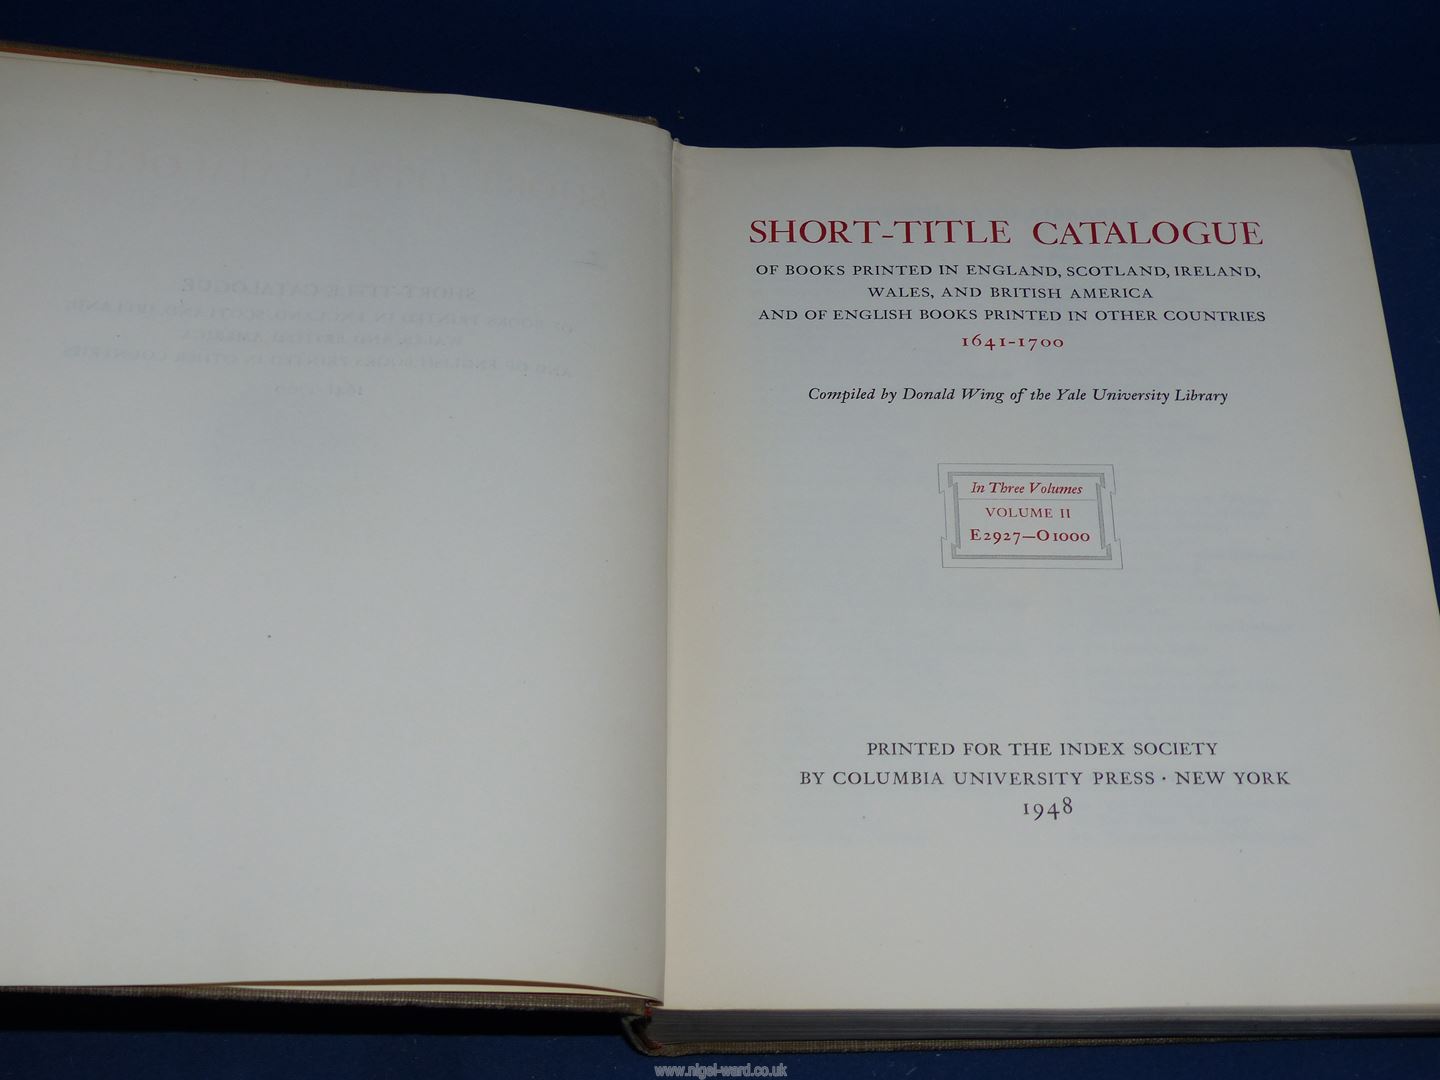 Three volumes of Short-title Catalogue dating 1641 - 1700 by The Index Society along with - Image 9 of 9